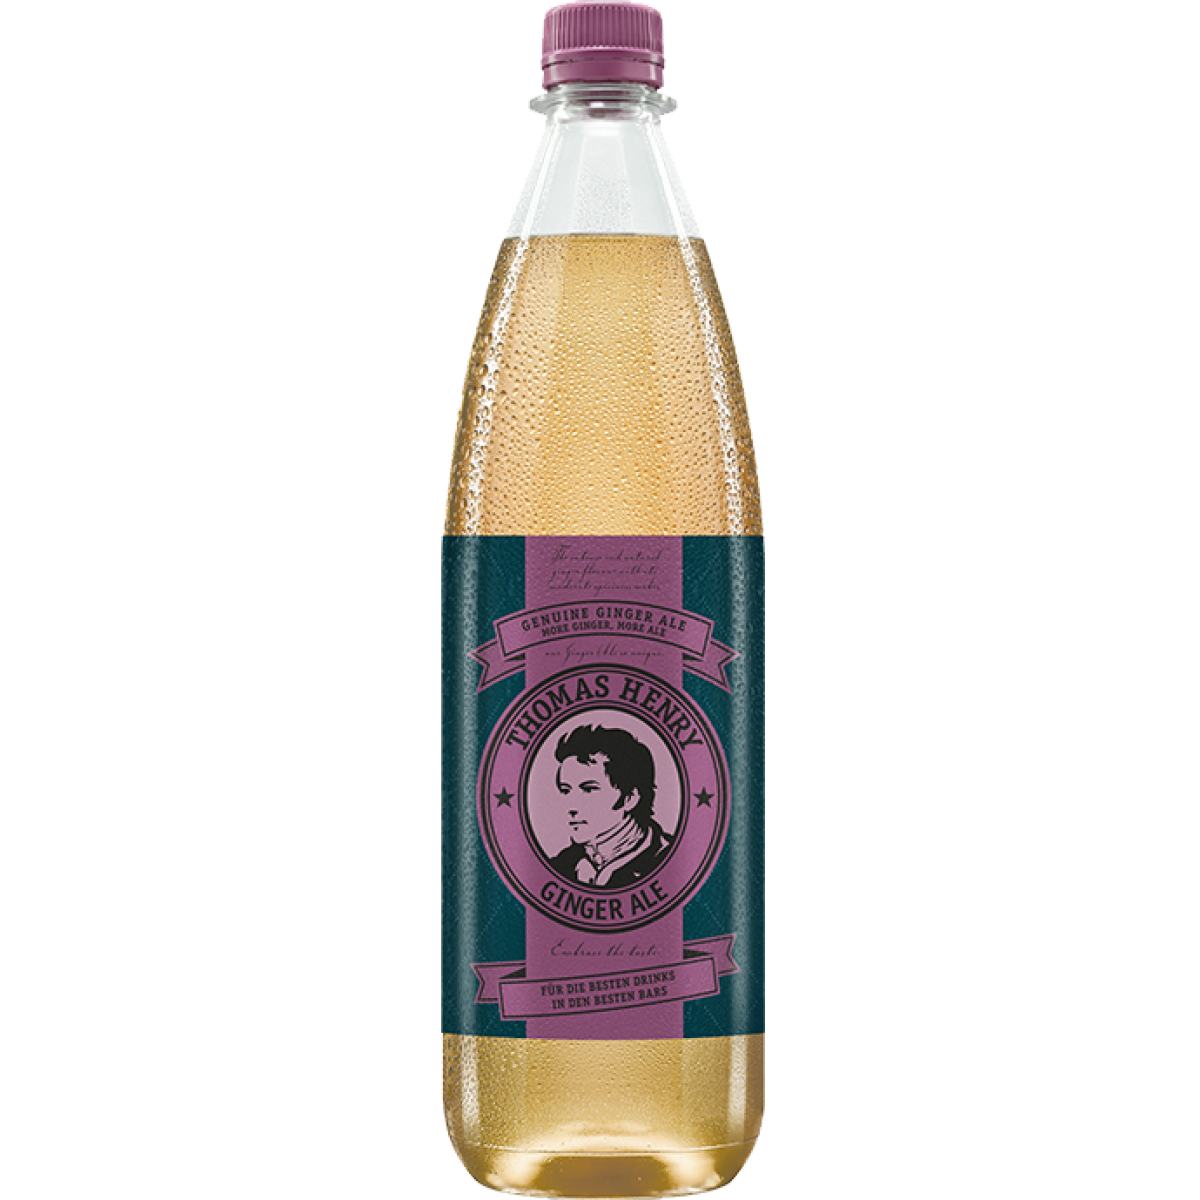 Thomas Henry GingerALE 6x1L